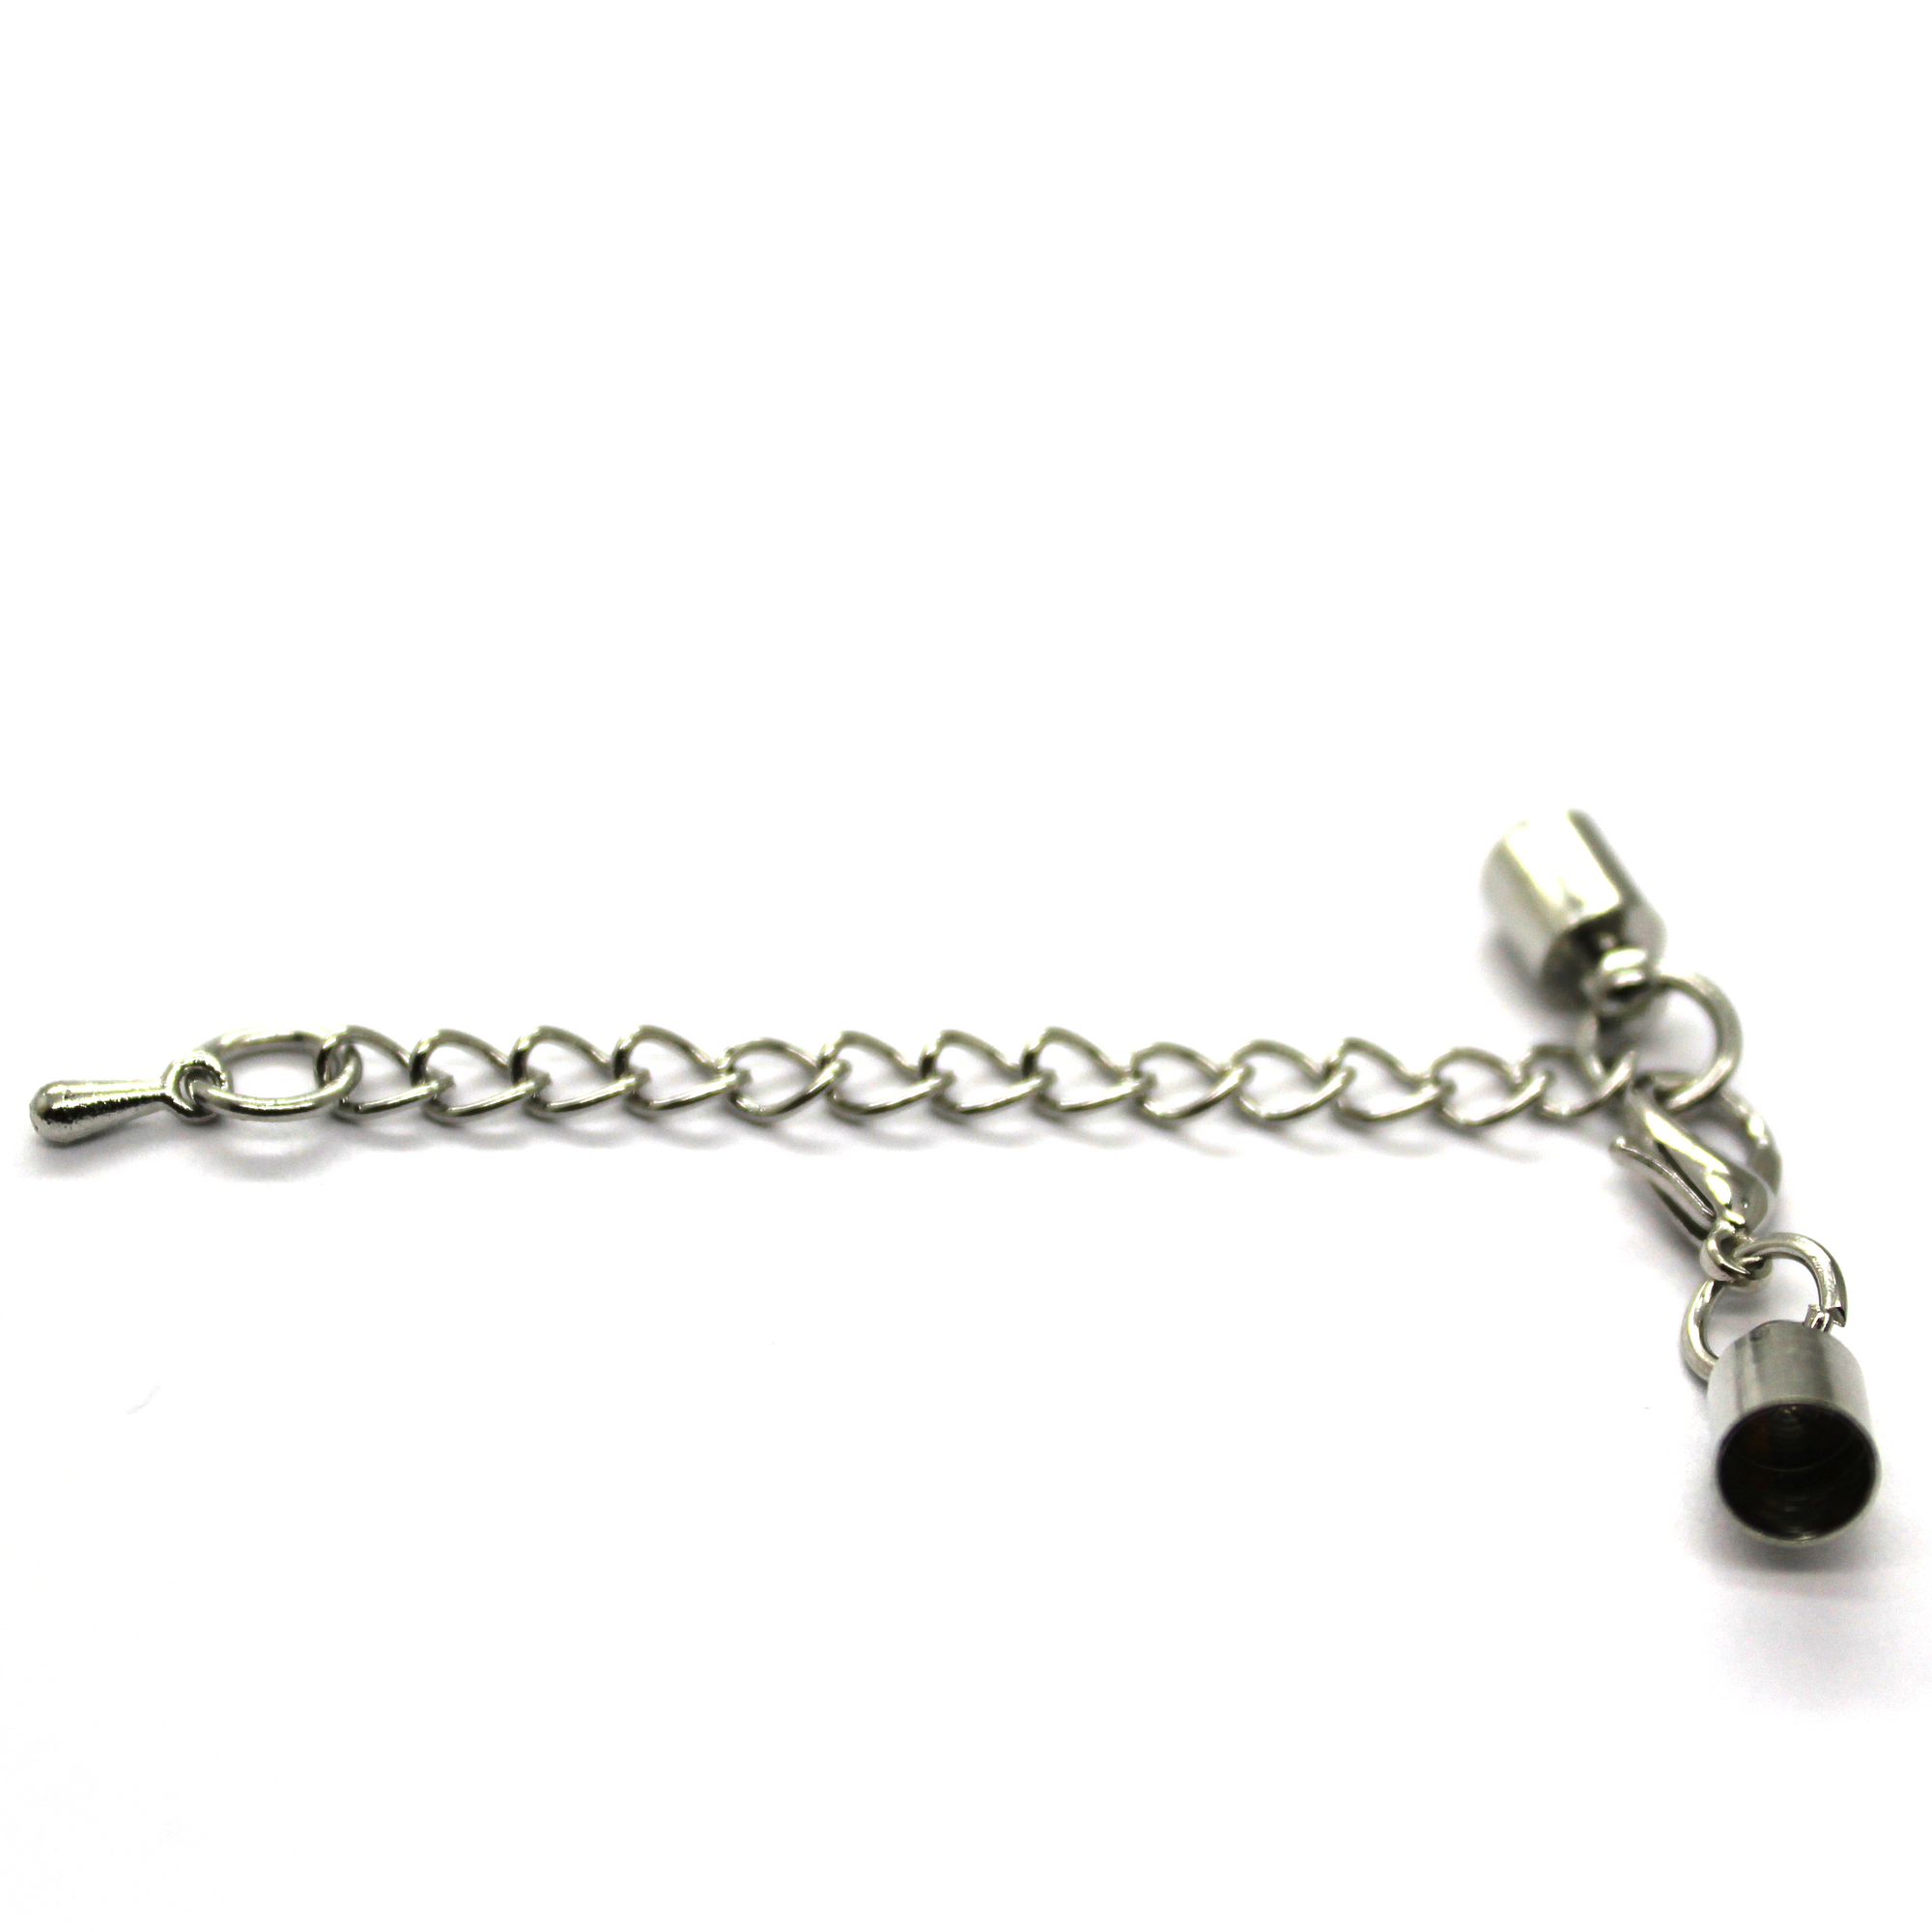 Clasp, Lobster and Barrel Clasp, Silver, Alloy, 12mm x 6mm, Sold Per pkg of 5